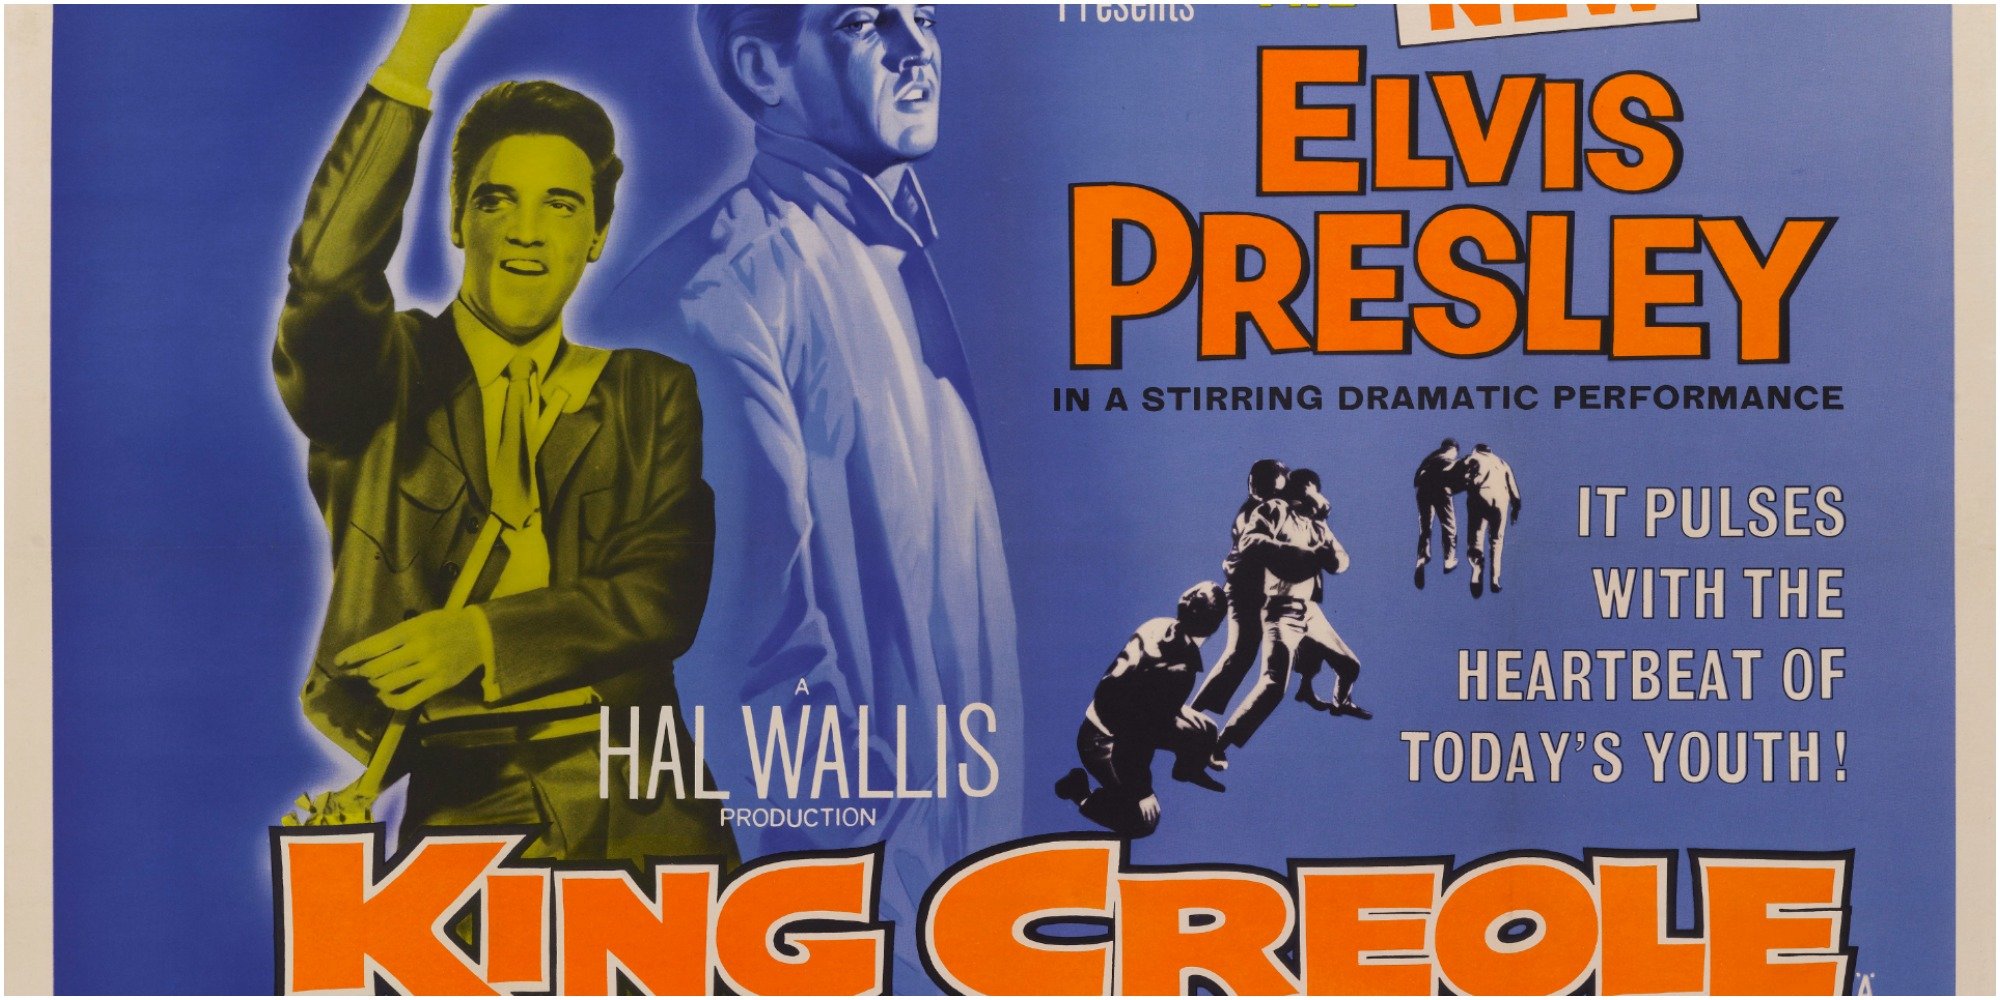 Movie poster depicting Elvis Presley in the movie "King Creole."